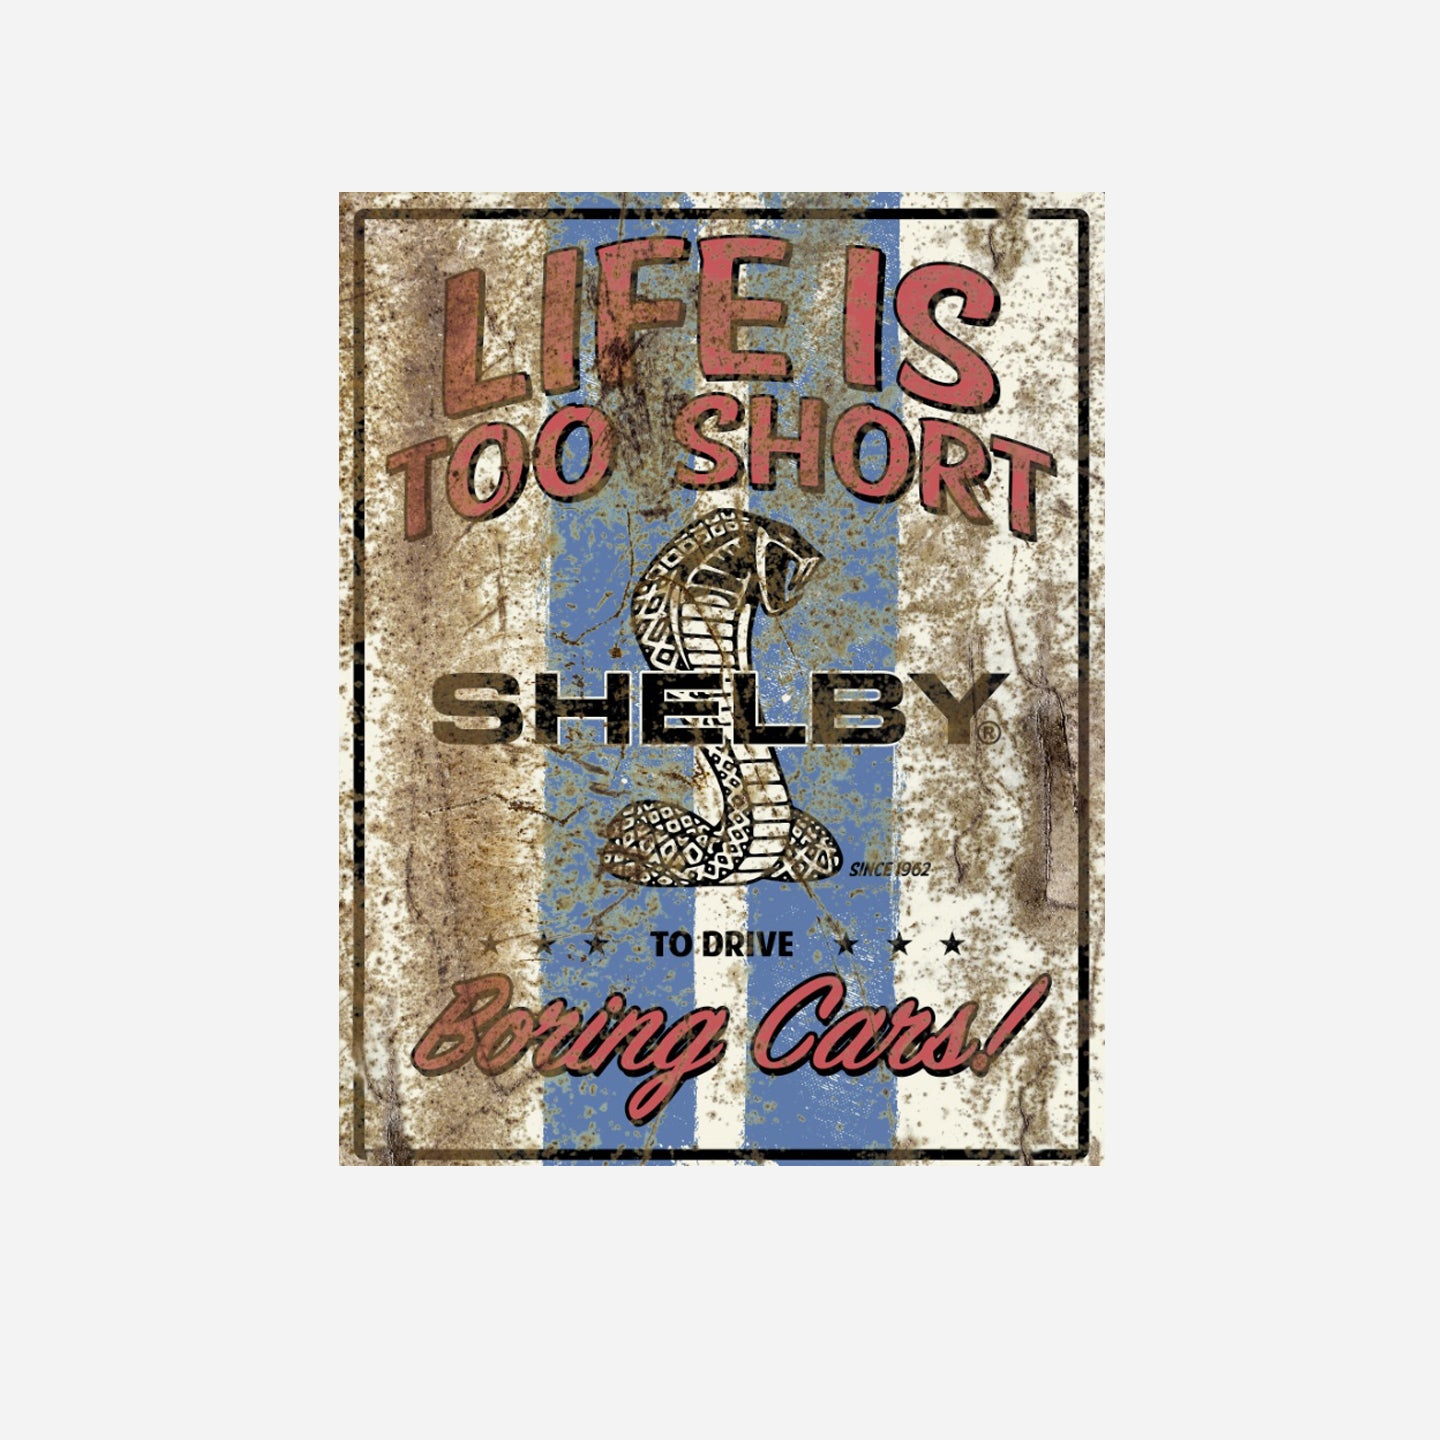 Shelby/Life is too short - T-Shirt